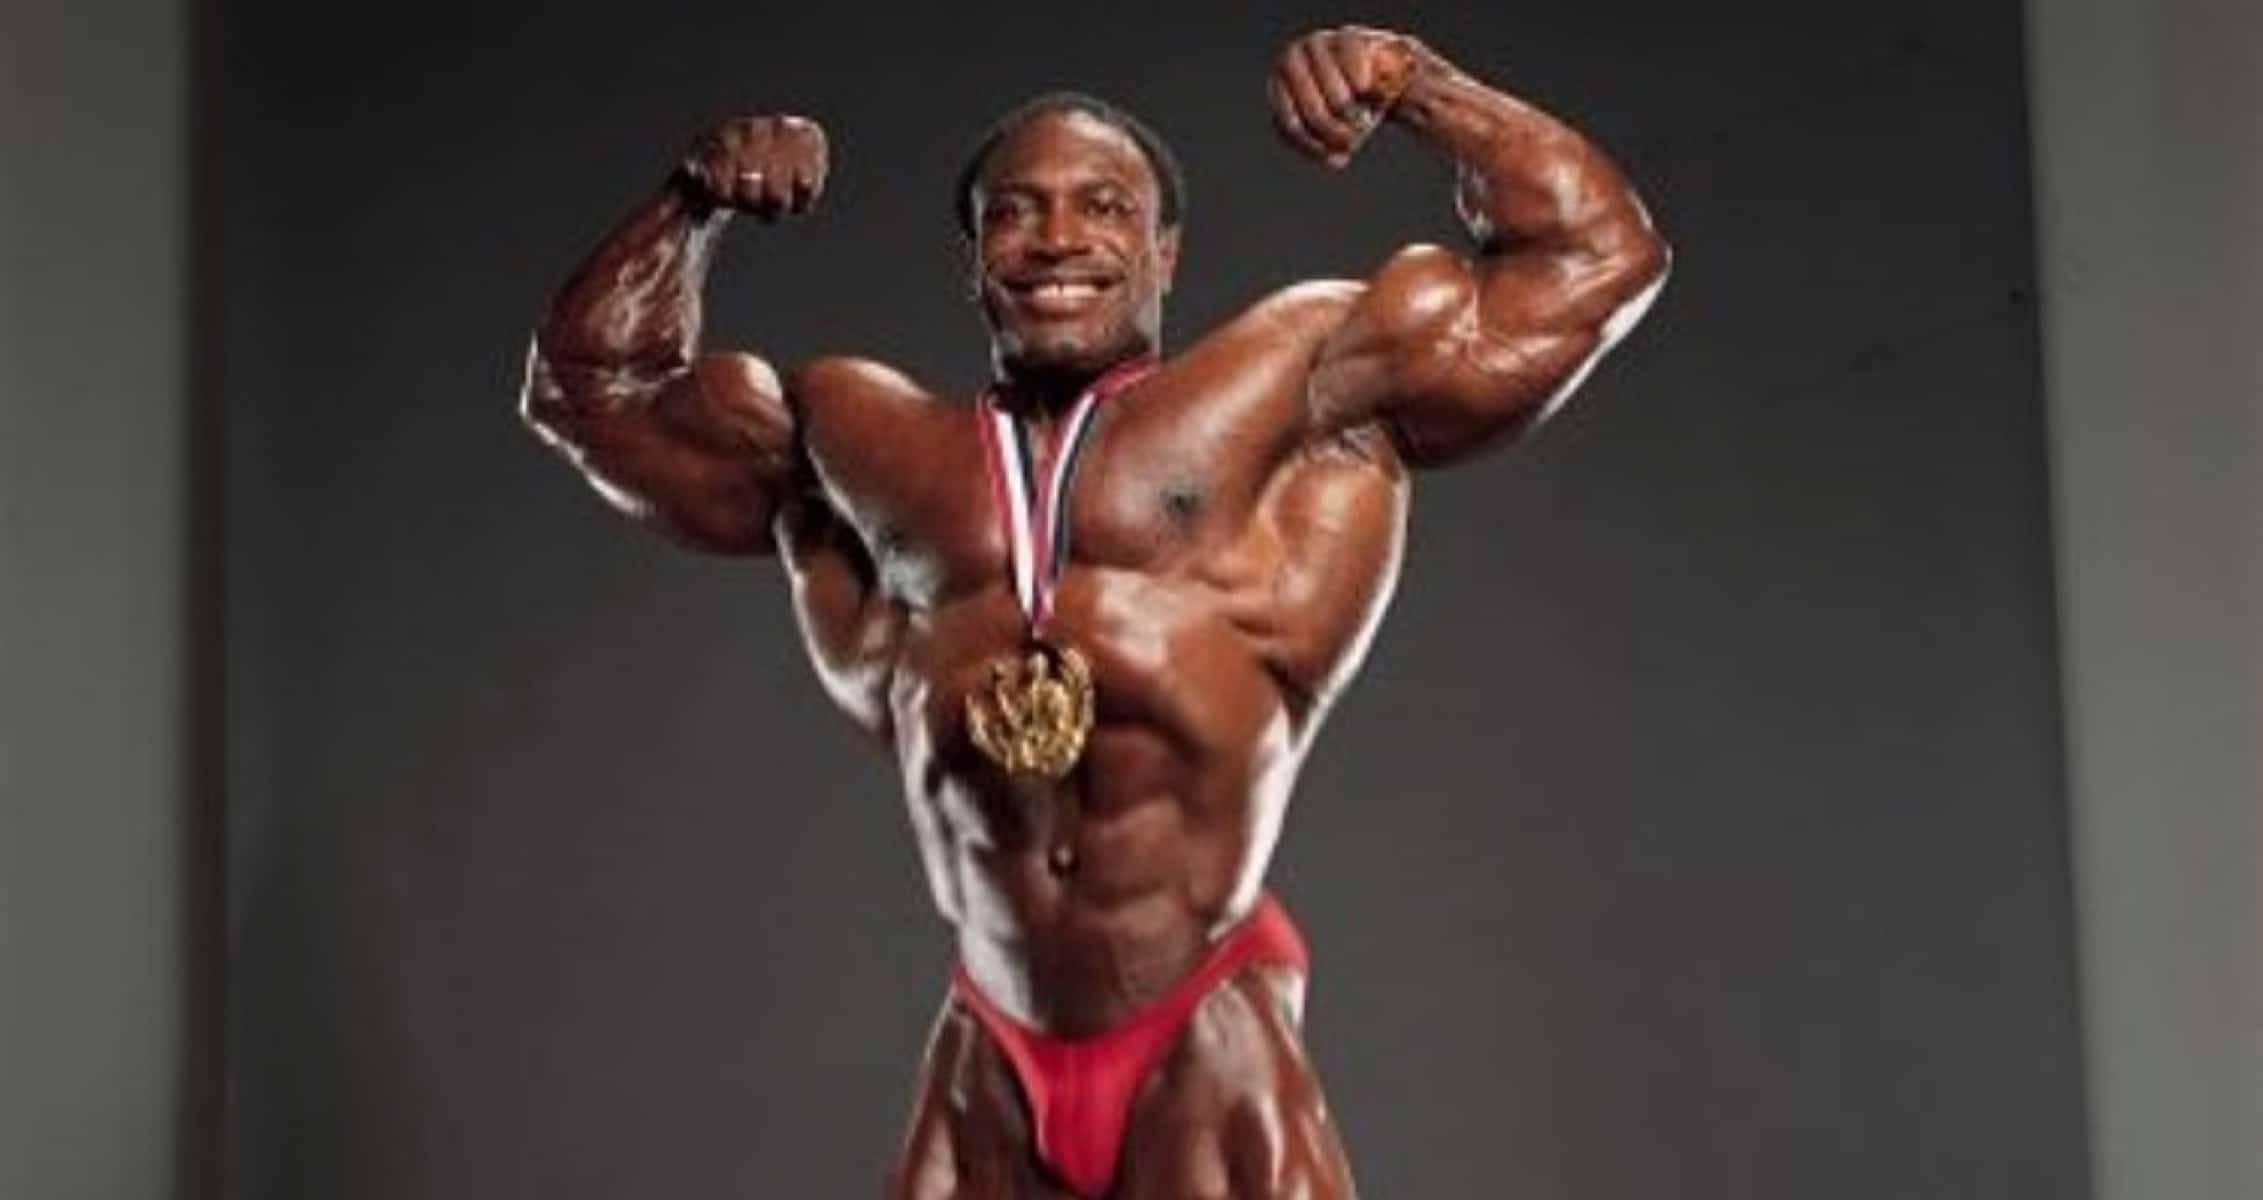 Lee Haney on Modern Bodybuilding and Coaching: “Athletes Are Bigger But Lack Quality”